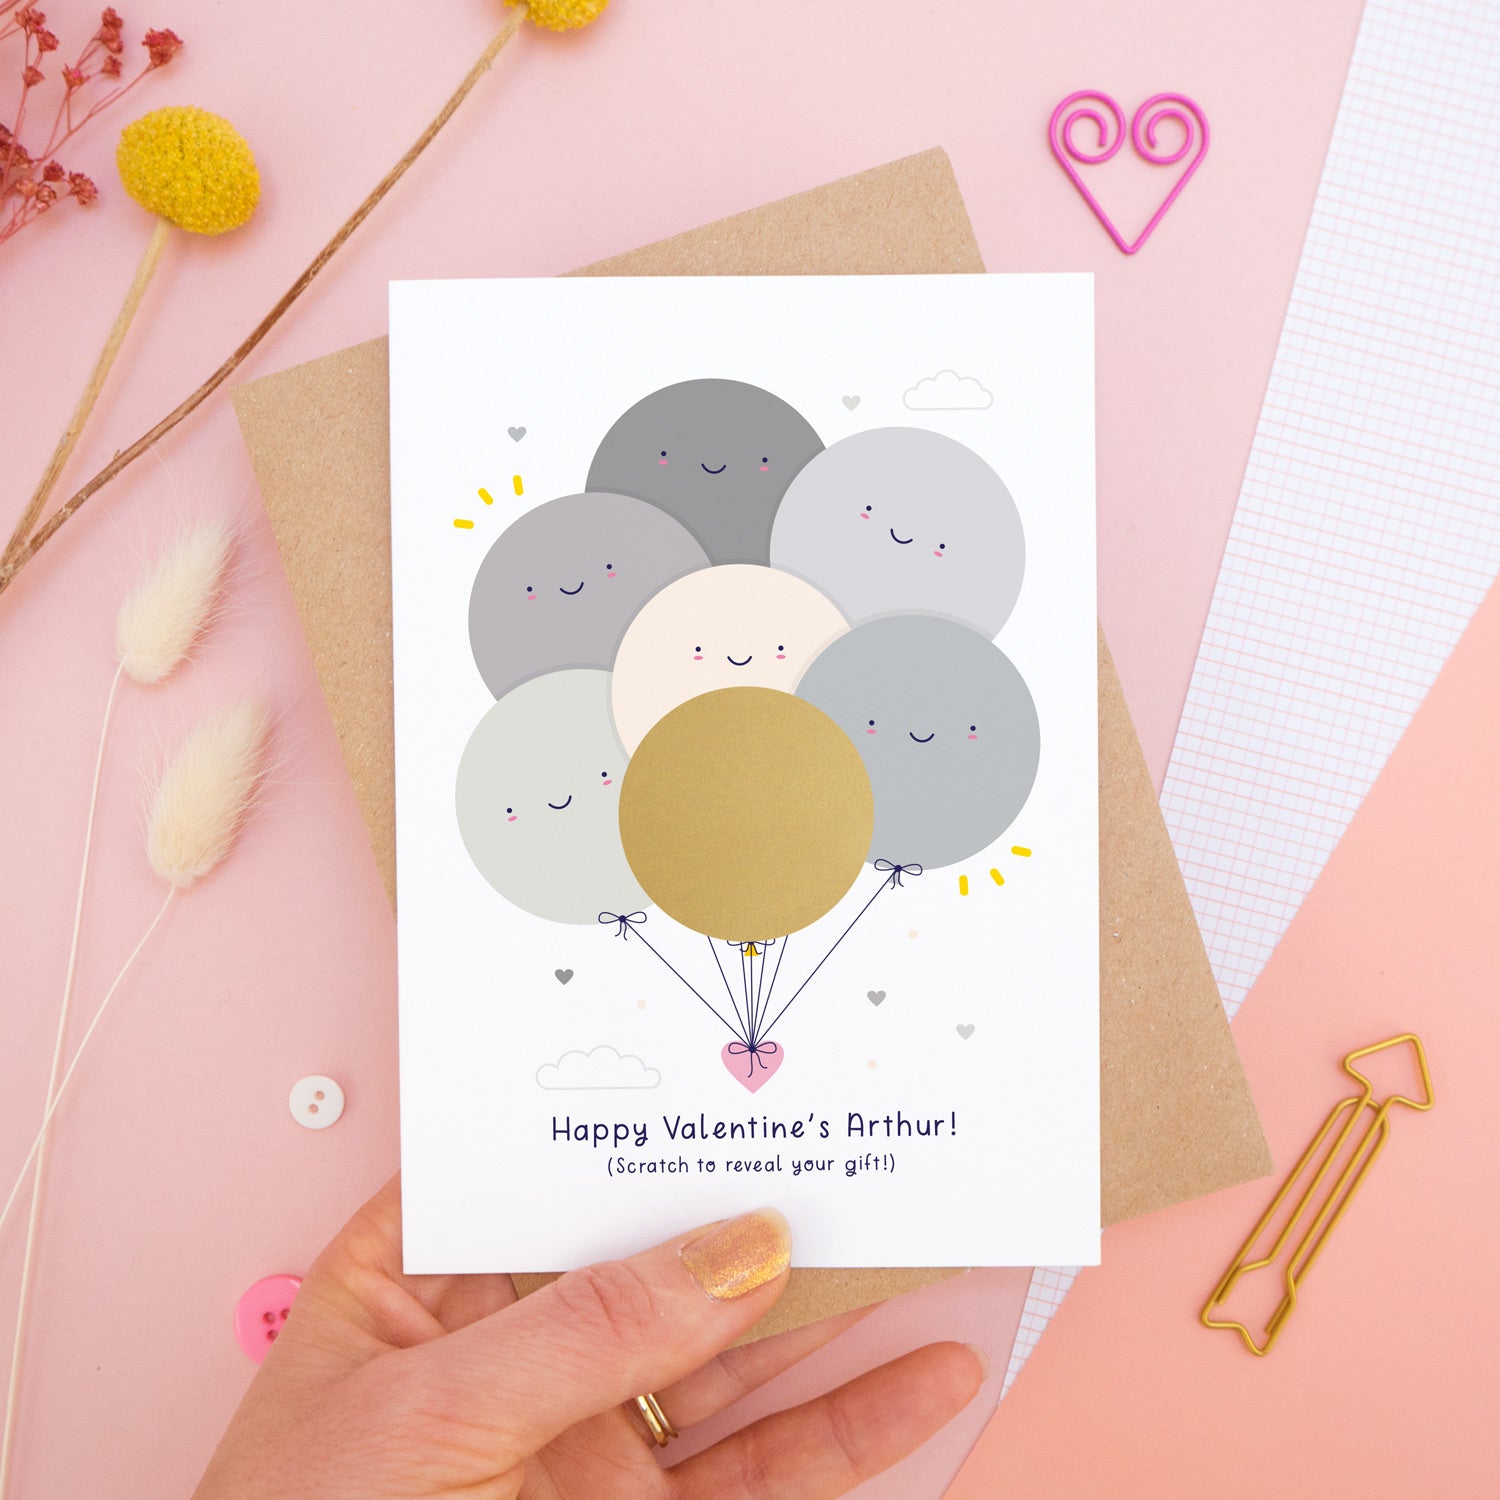 A personalised Valentine’s scratch card photographed on a pink background with floral props, paper clips, and buttons. This card shows the grey colour scheme and the golden circle has yet to be scratched off to reveal the secret message!